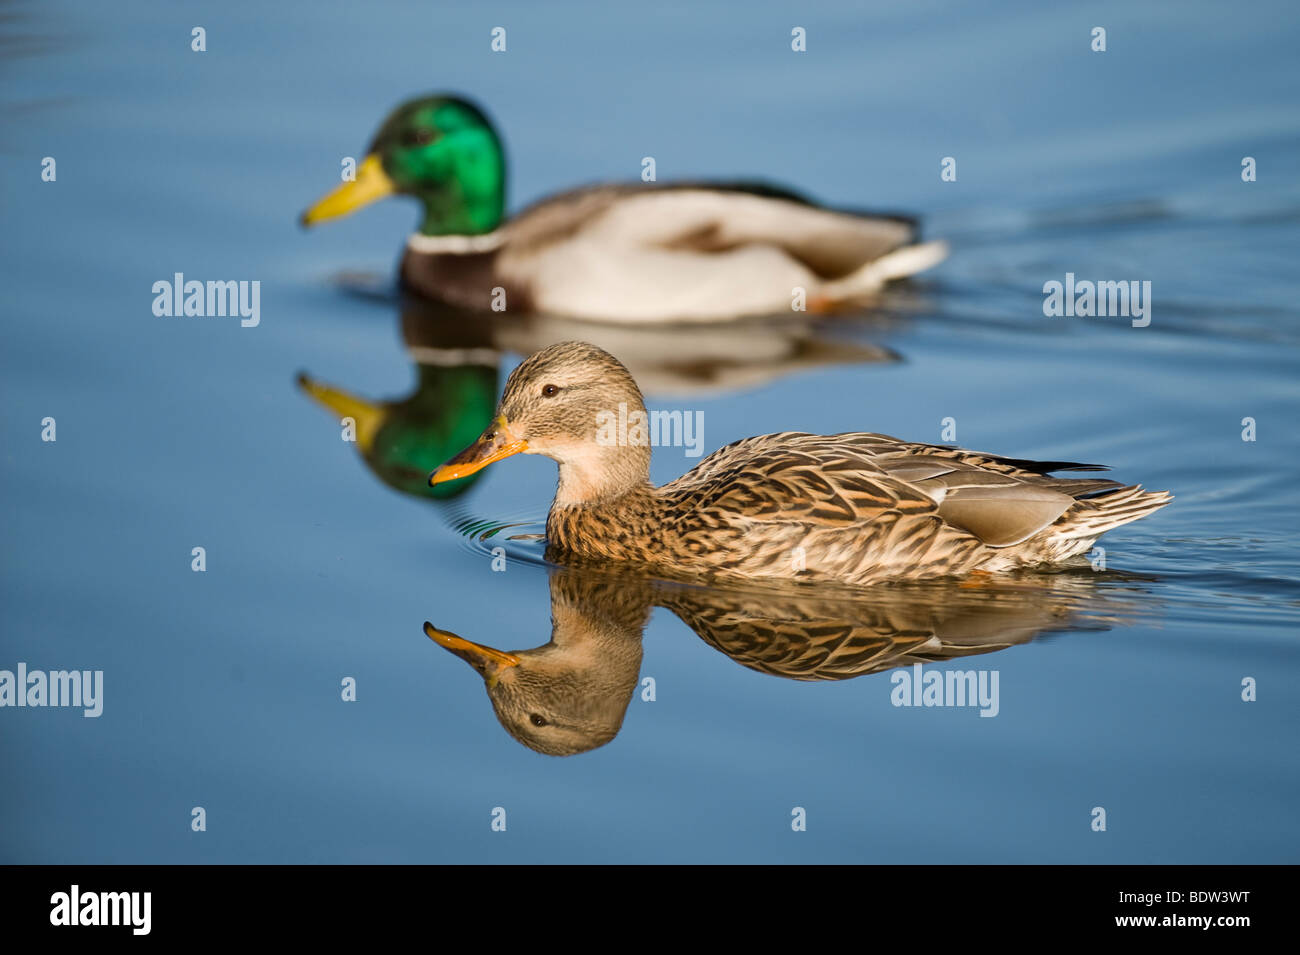 Two ducks swimming in a pond Stock Photo